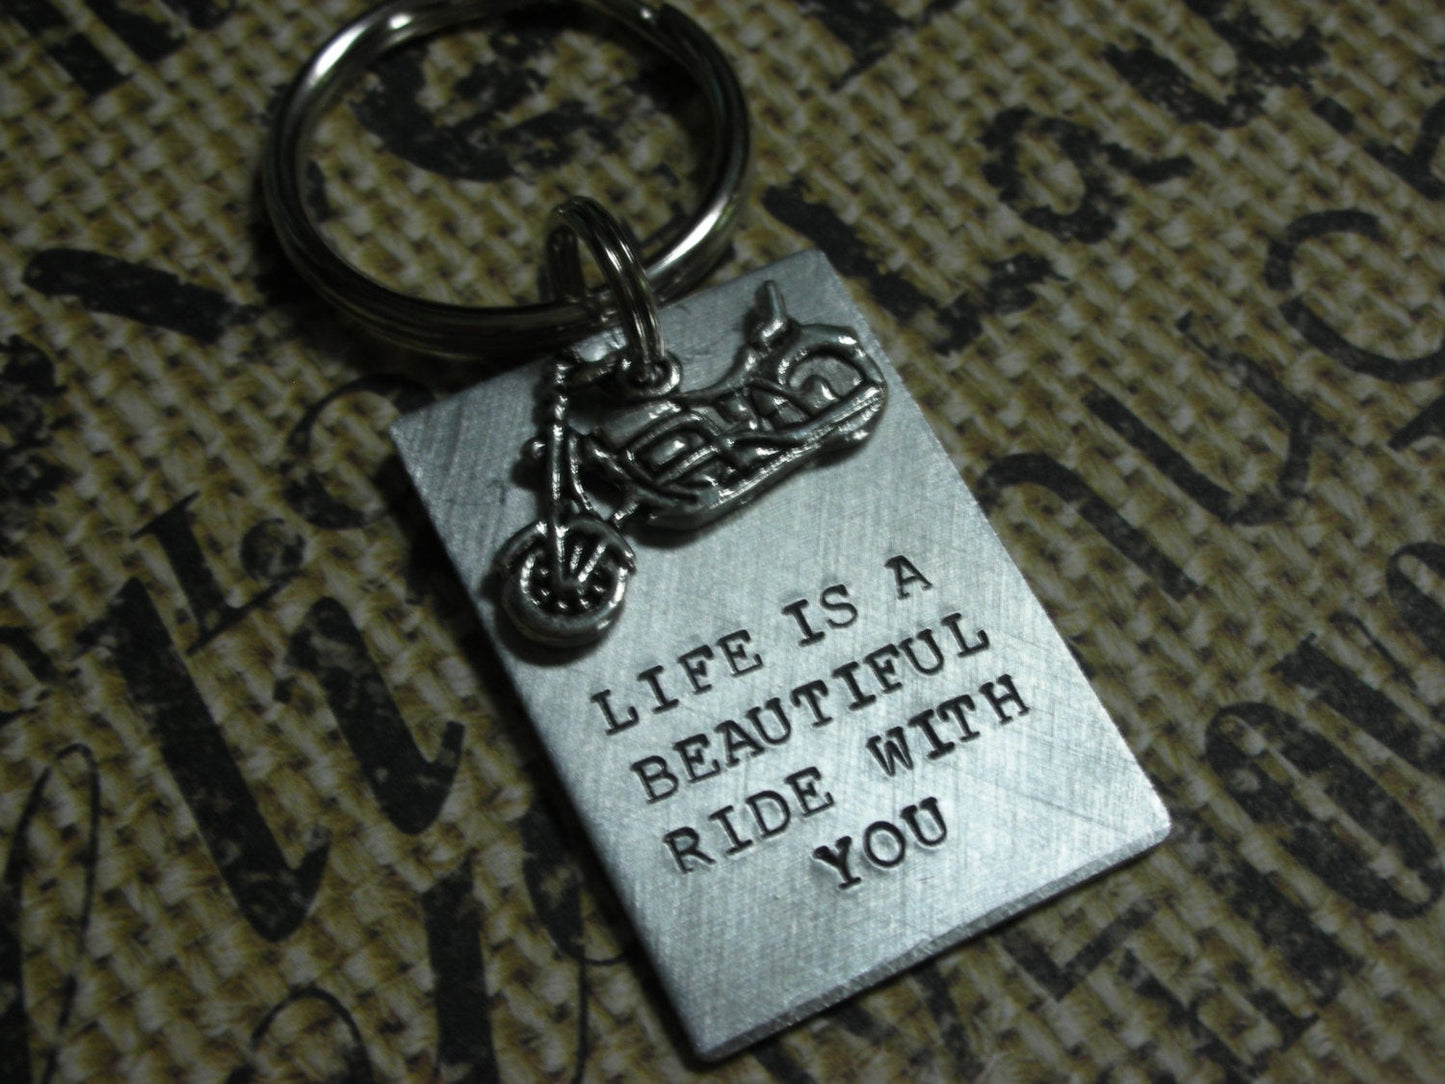 Harley Davidson Motorcycle Keychain--Life Is A Beautiful Ride With You- Valentine&#39;s Day Gift-Father Birthday Gift-Gift for Dad